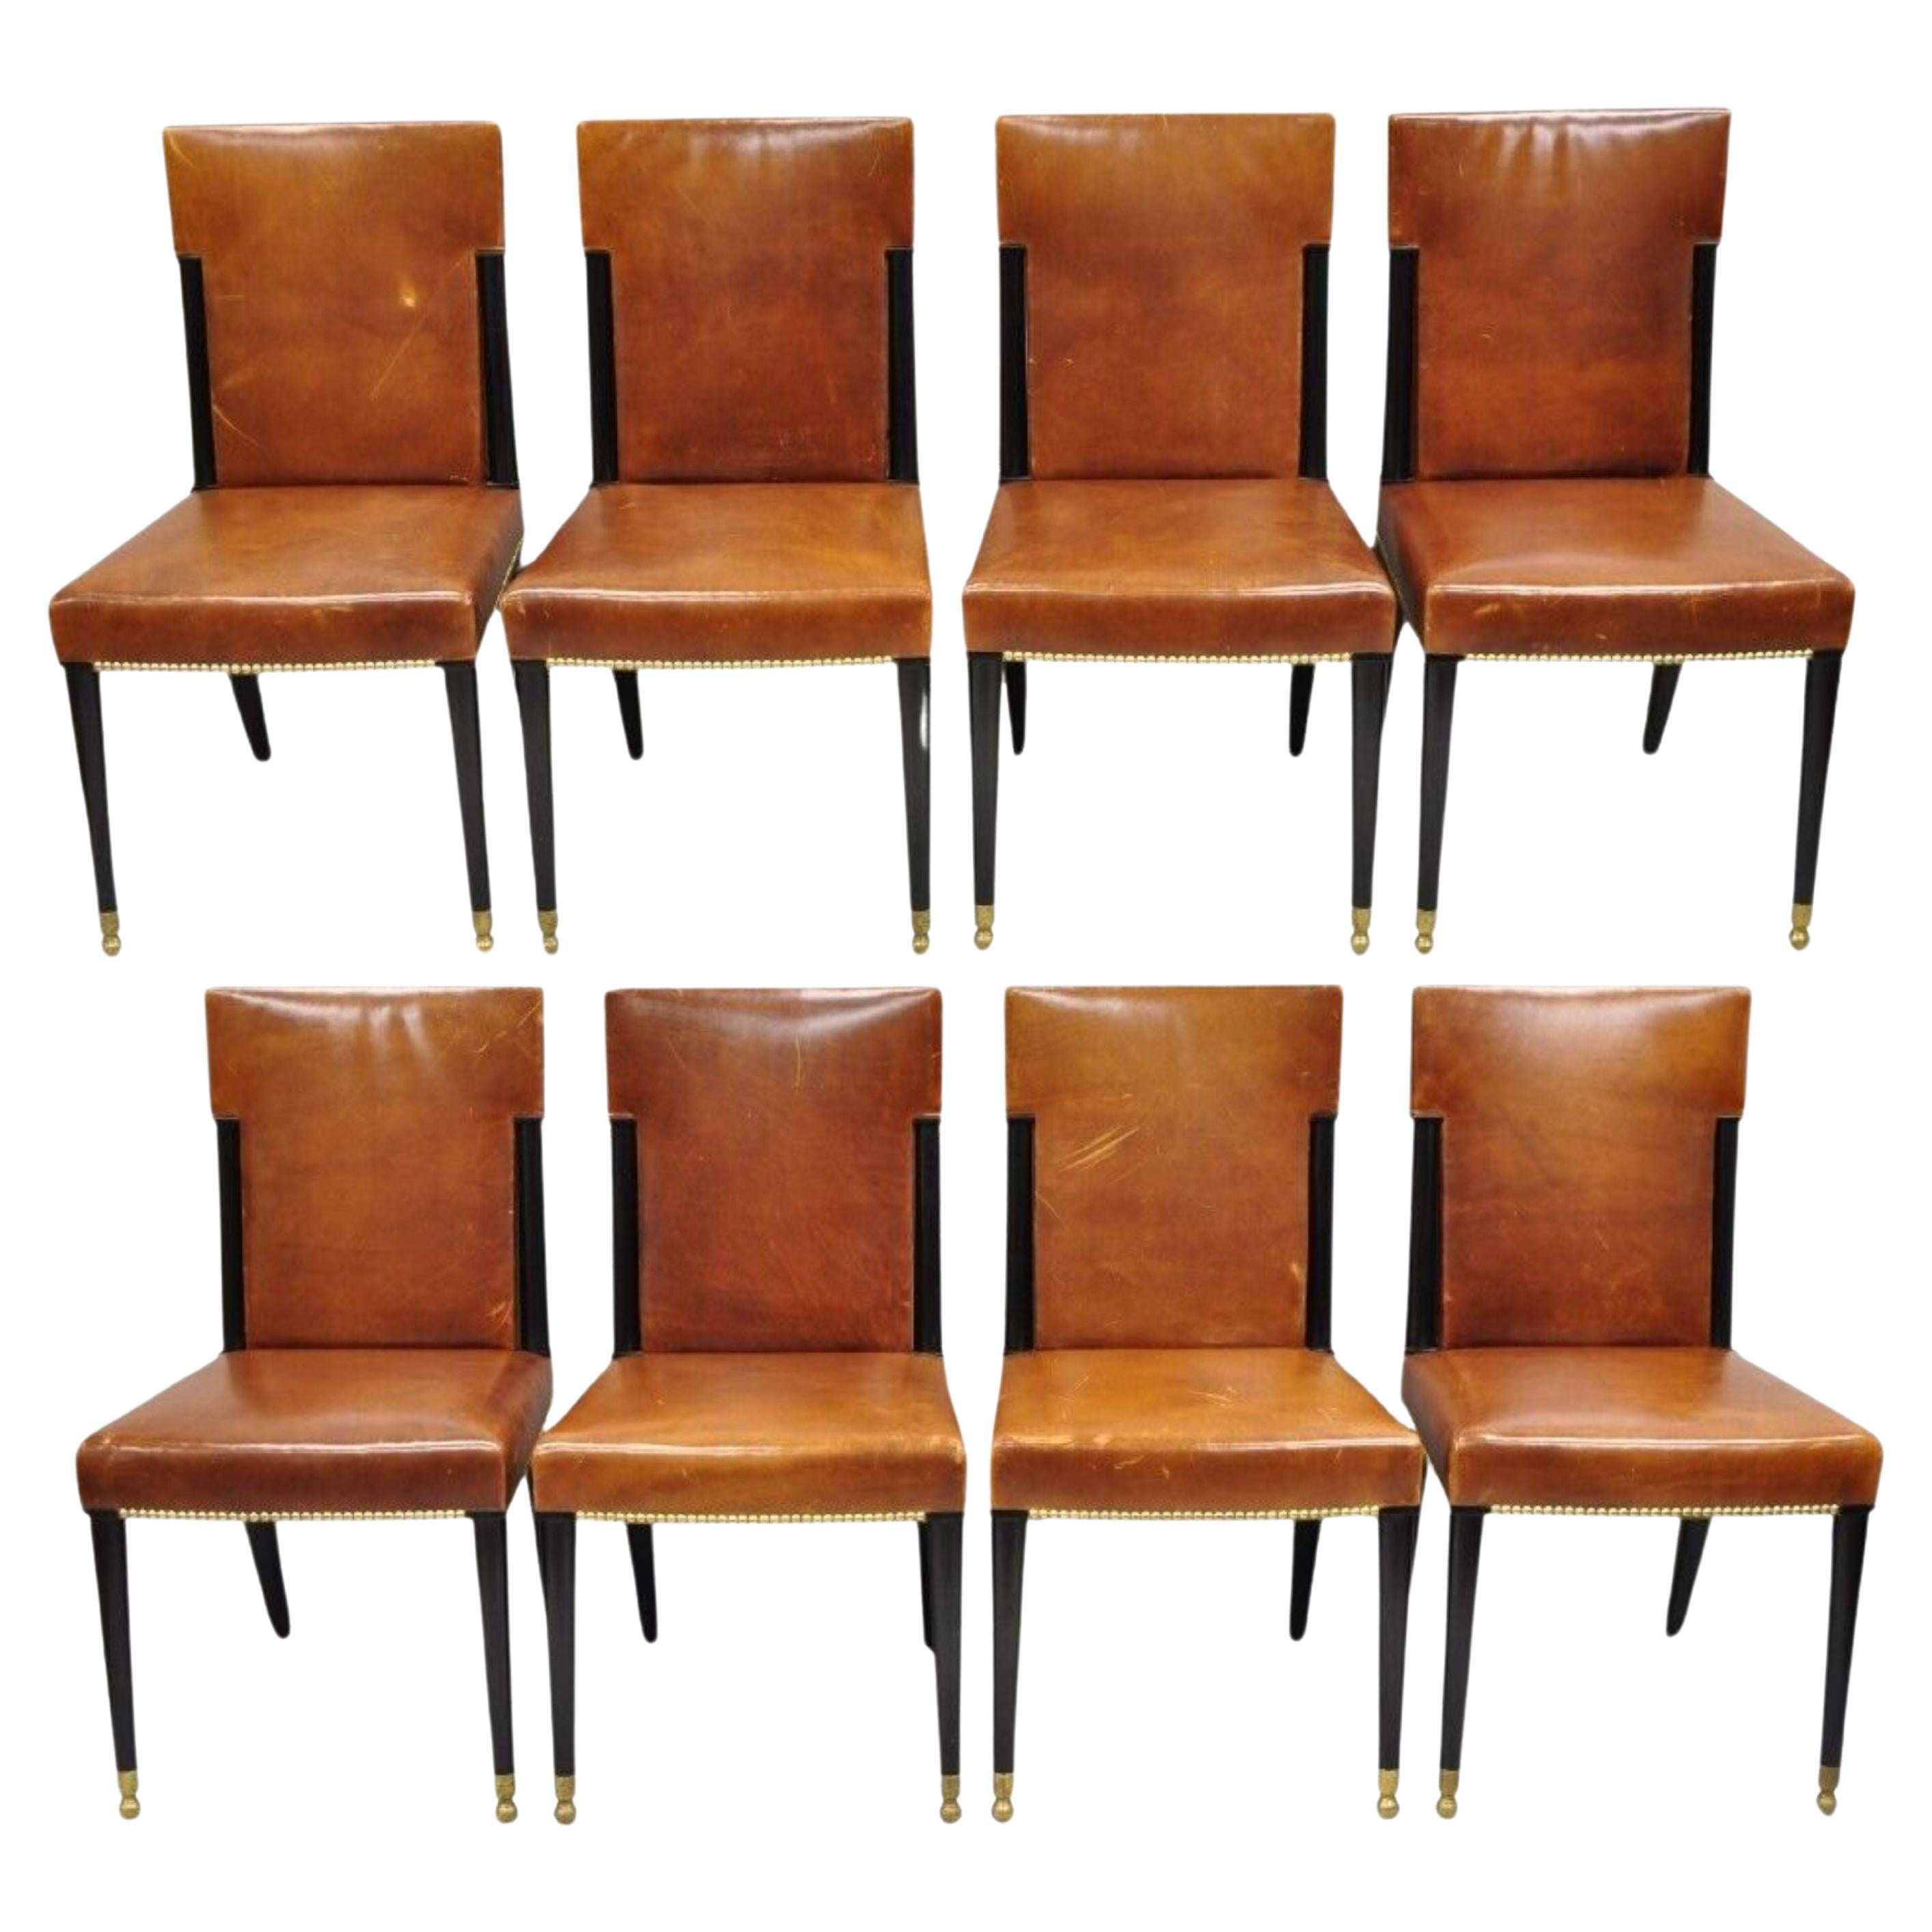 French Art Deco Style Brown Leather Ebonized Frame Dining Chairs - Set of 8 For Sale